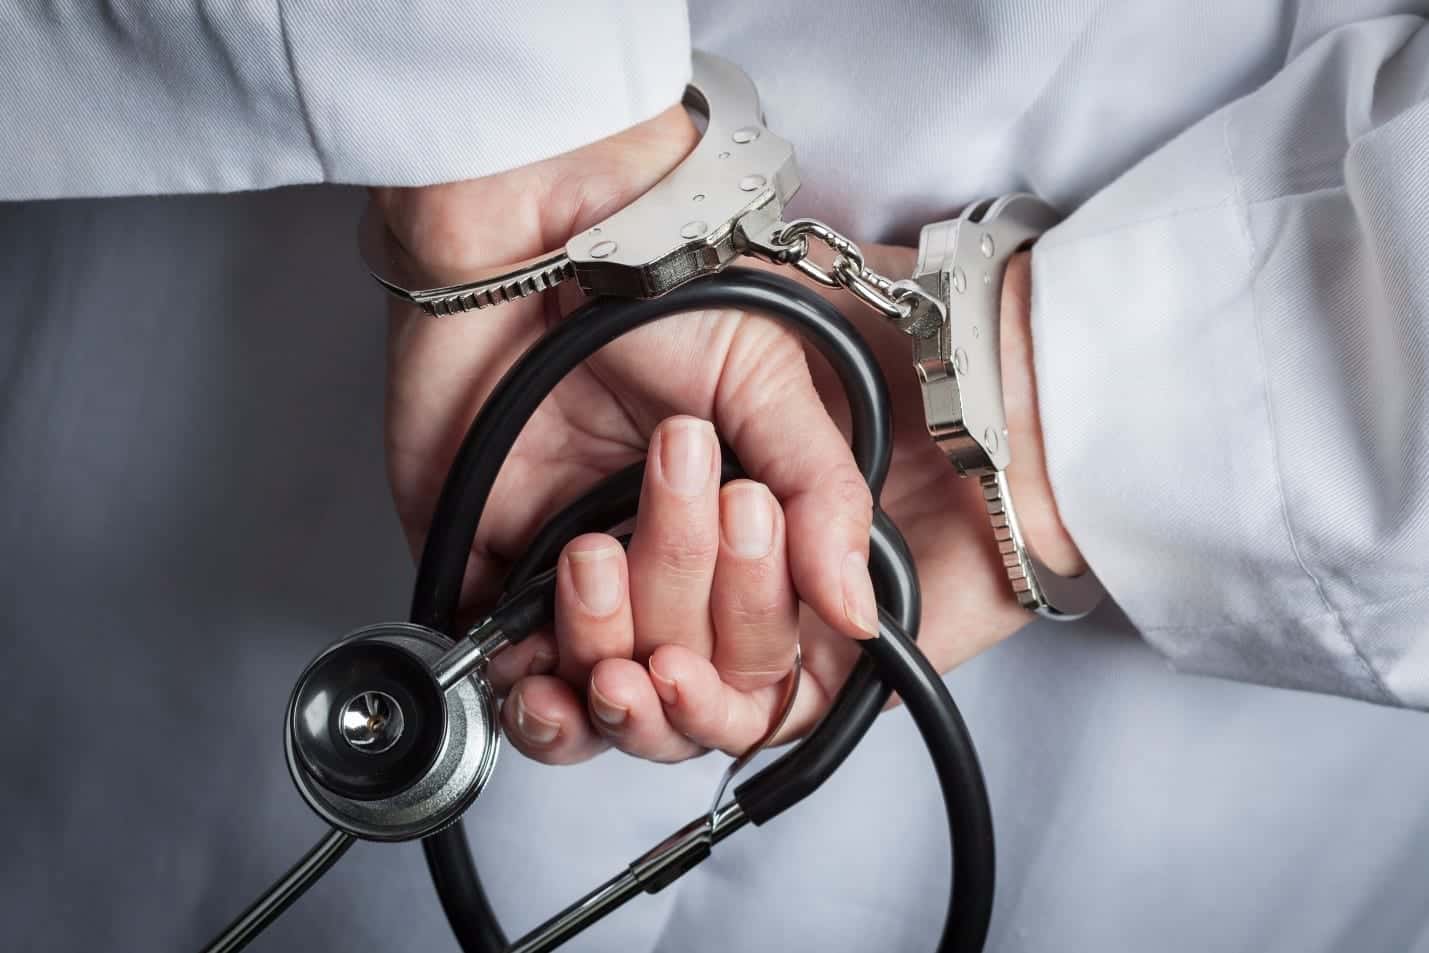 Doctors and Health Care Providers under Unreasonable Threat of Prosecution for Health Care Fraud